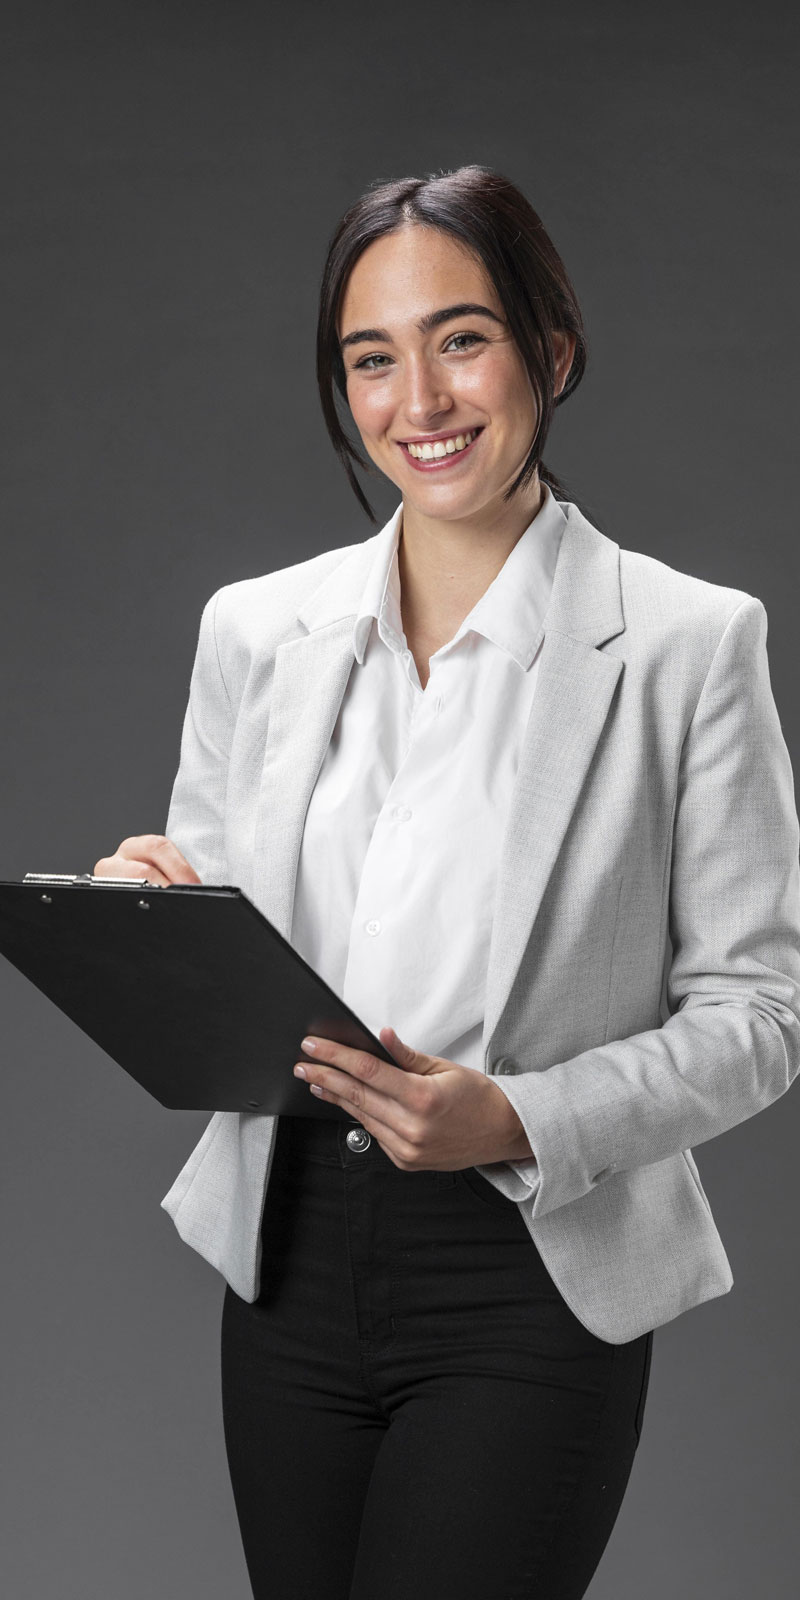 Credits to https://www.freepik.com/free-photo/portrait-female-lawyer-formal-suit-with-clipboard_13397643.htm